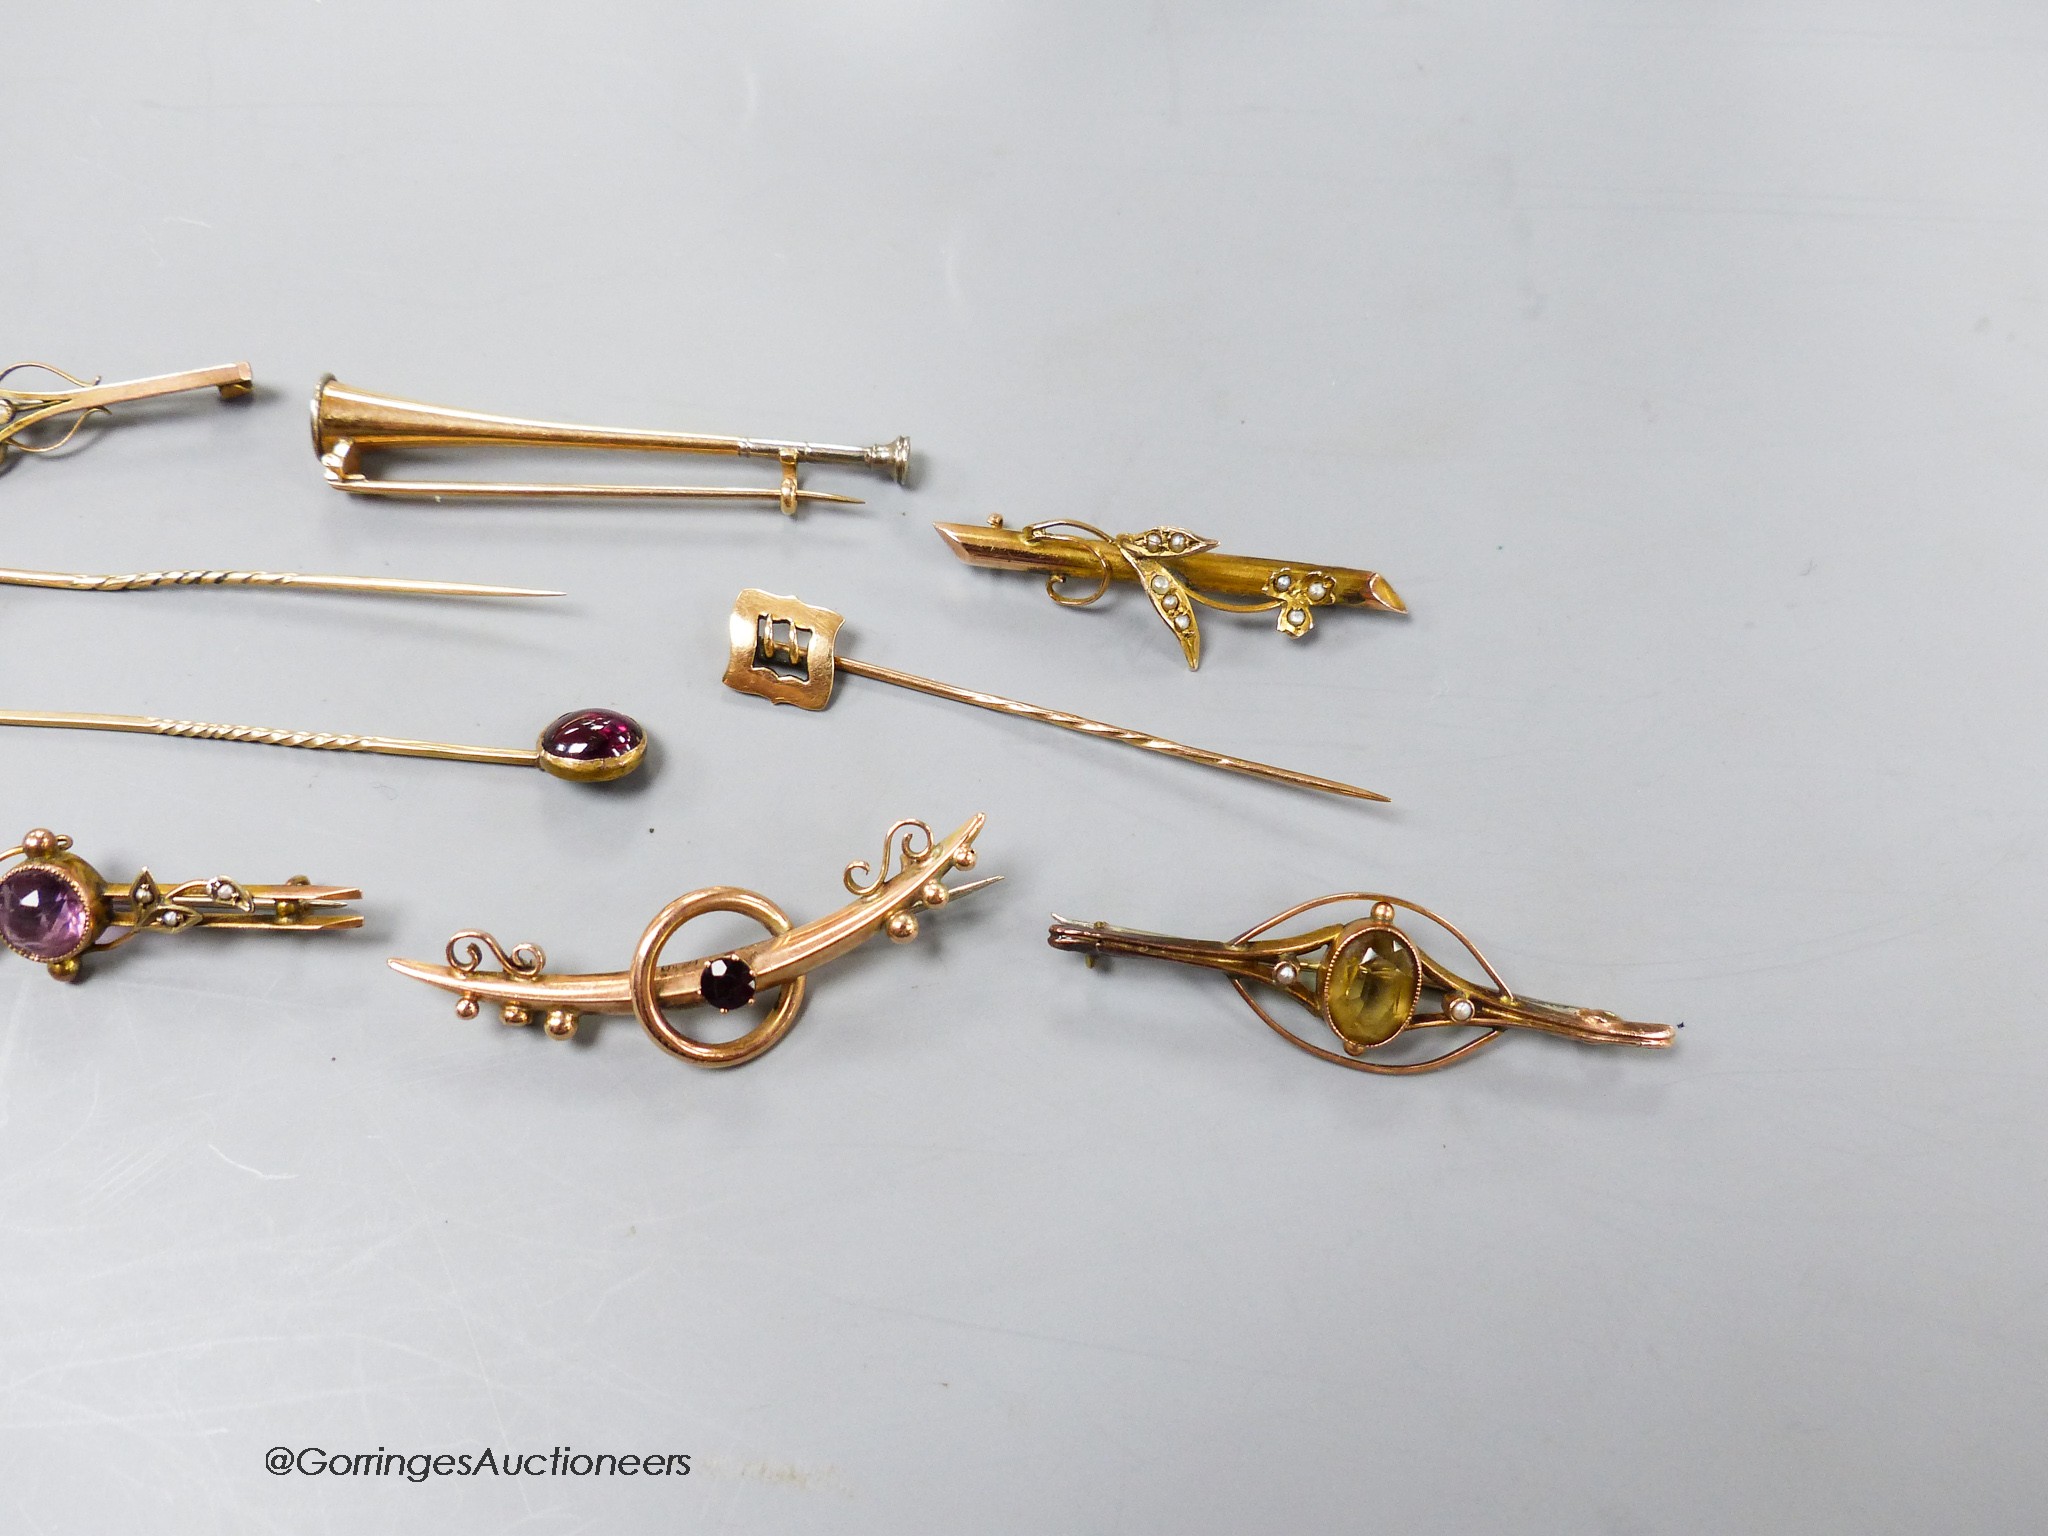 Four assorted early 20th century 9ct and gem set bar brooches, gross 9.1 grams, two yellow metal bar brooches including hunting horn and two yellow metal gem set stick pins, gross 10 grams and a 15ct stick pin, 1.4 grams